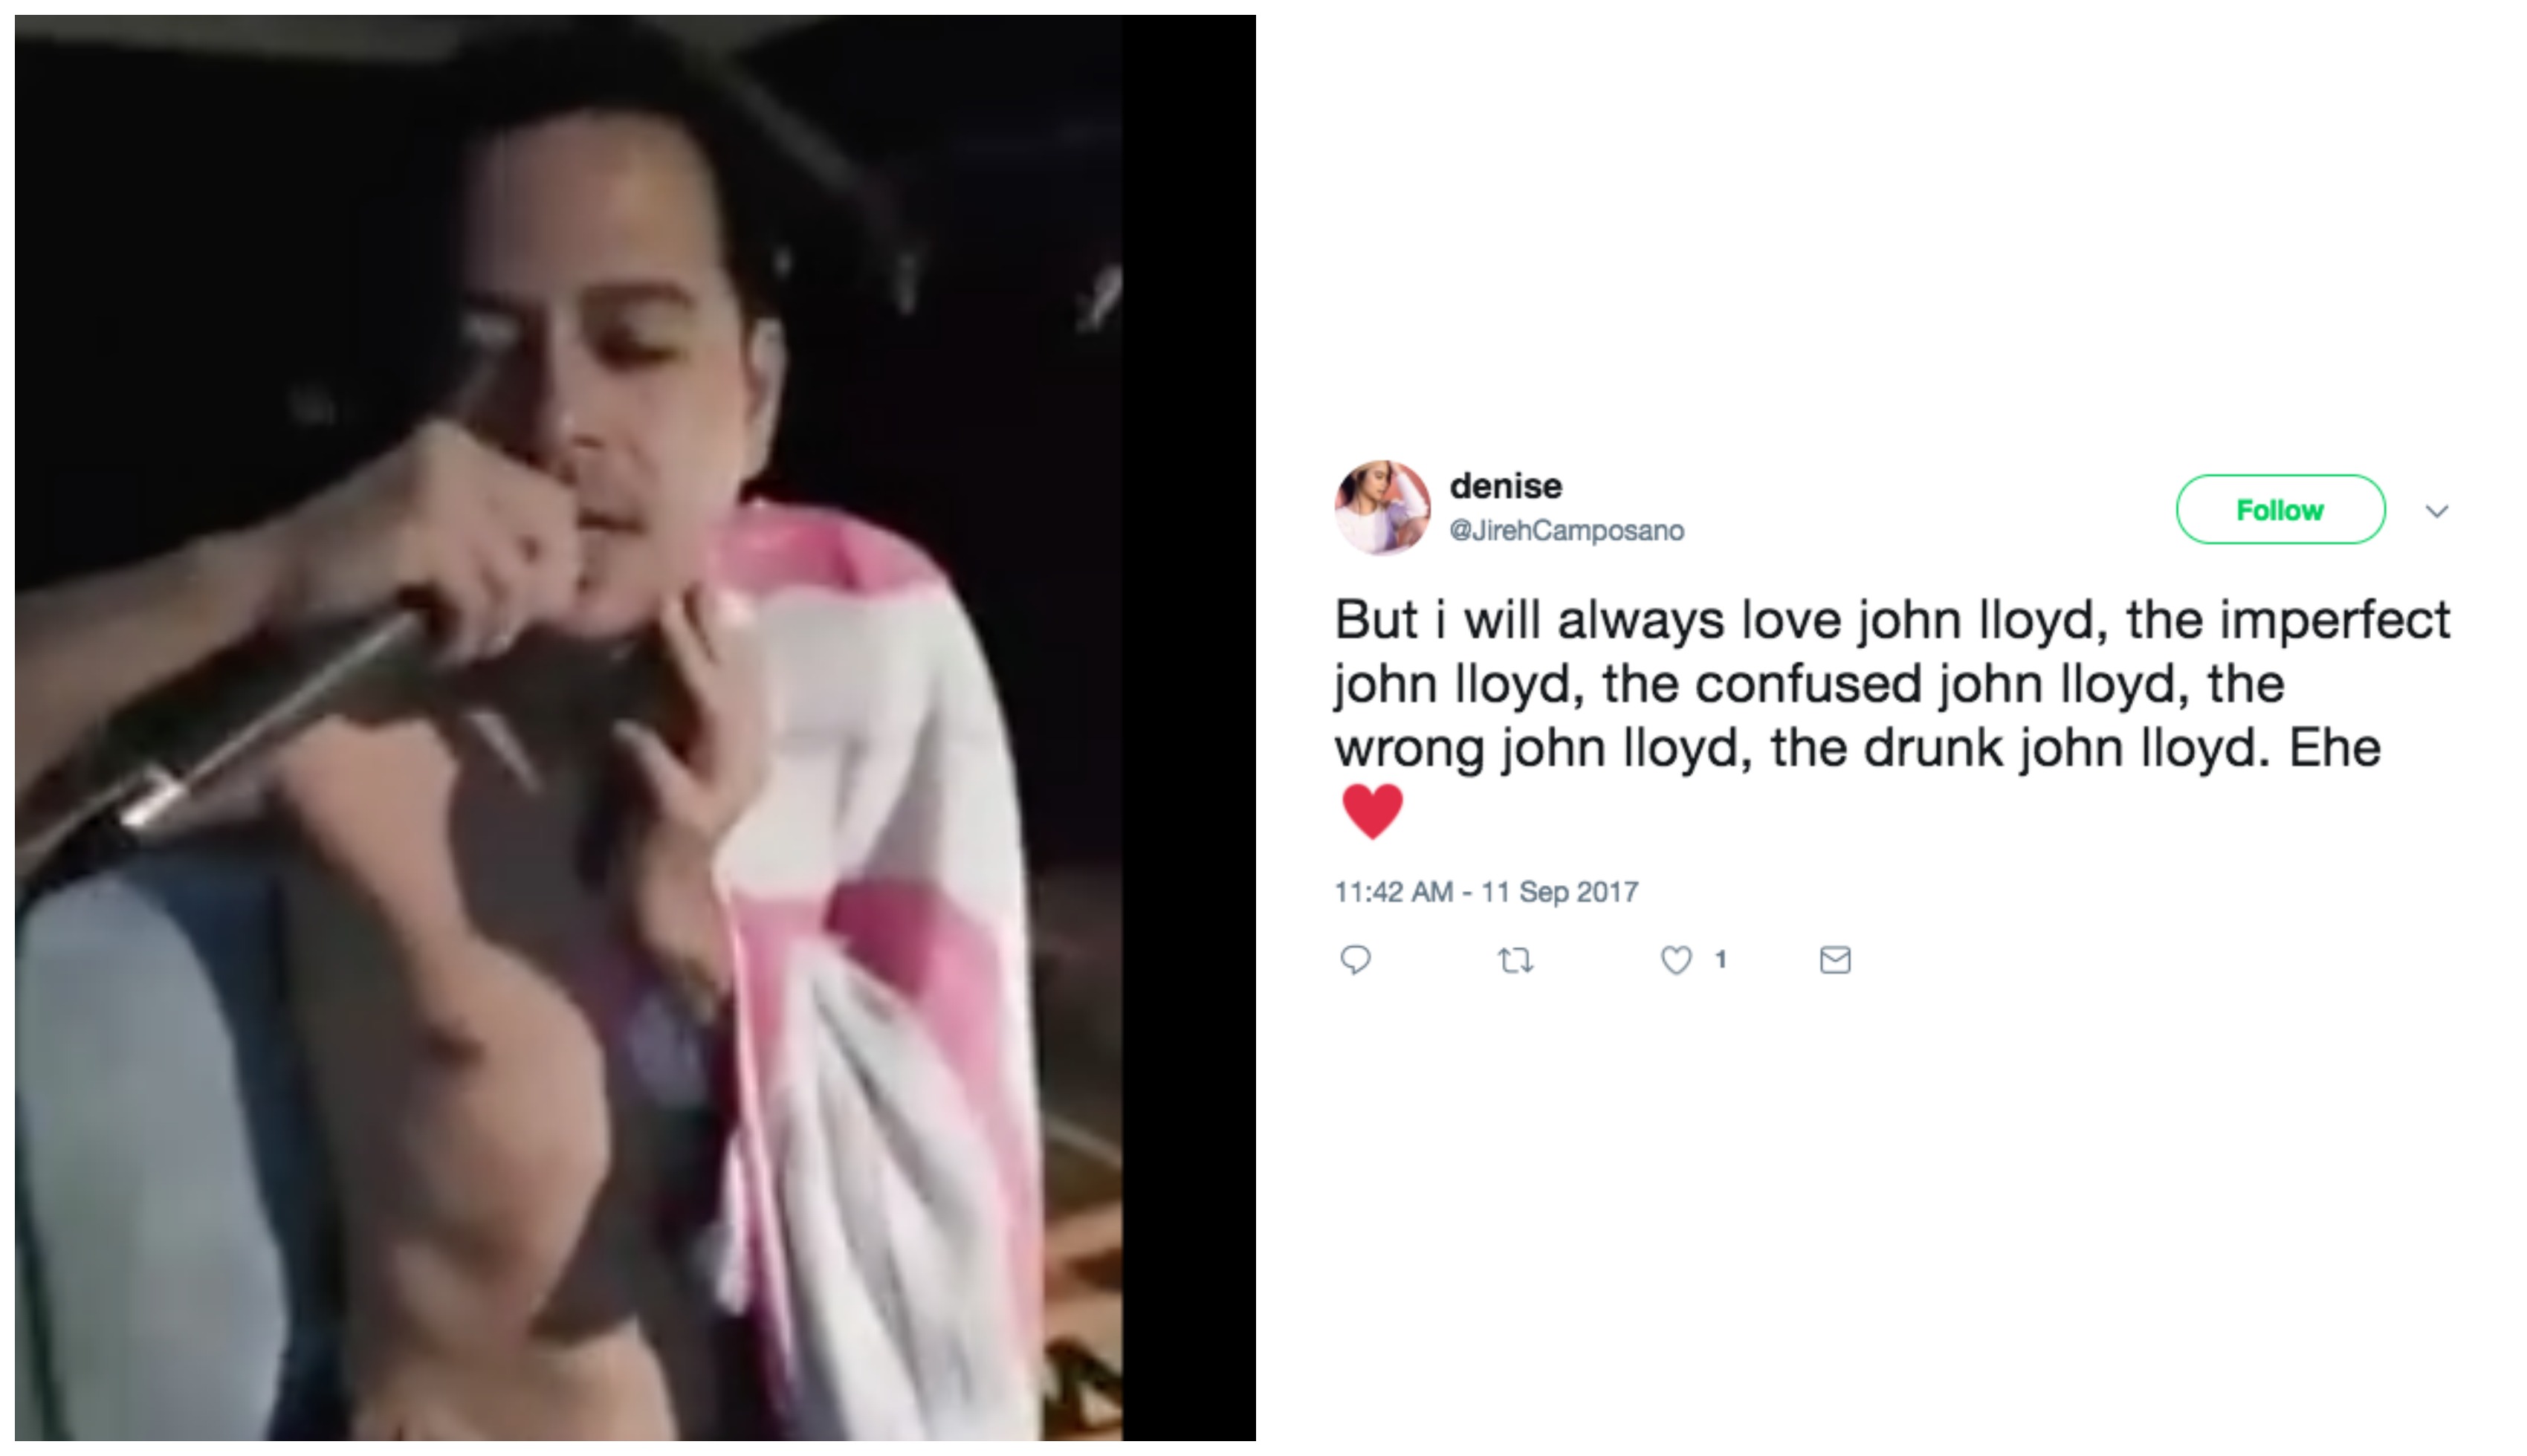 Screen shots from video on Marc (MJ) Facebook page and tweet by @JirehCamposano